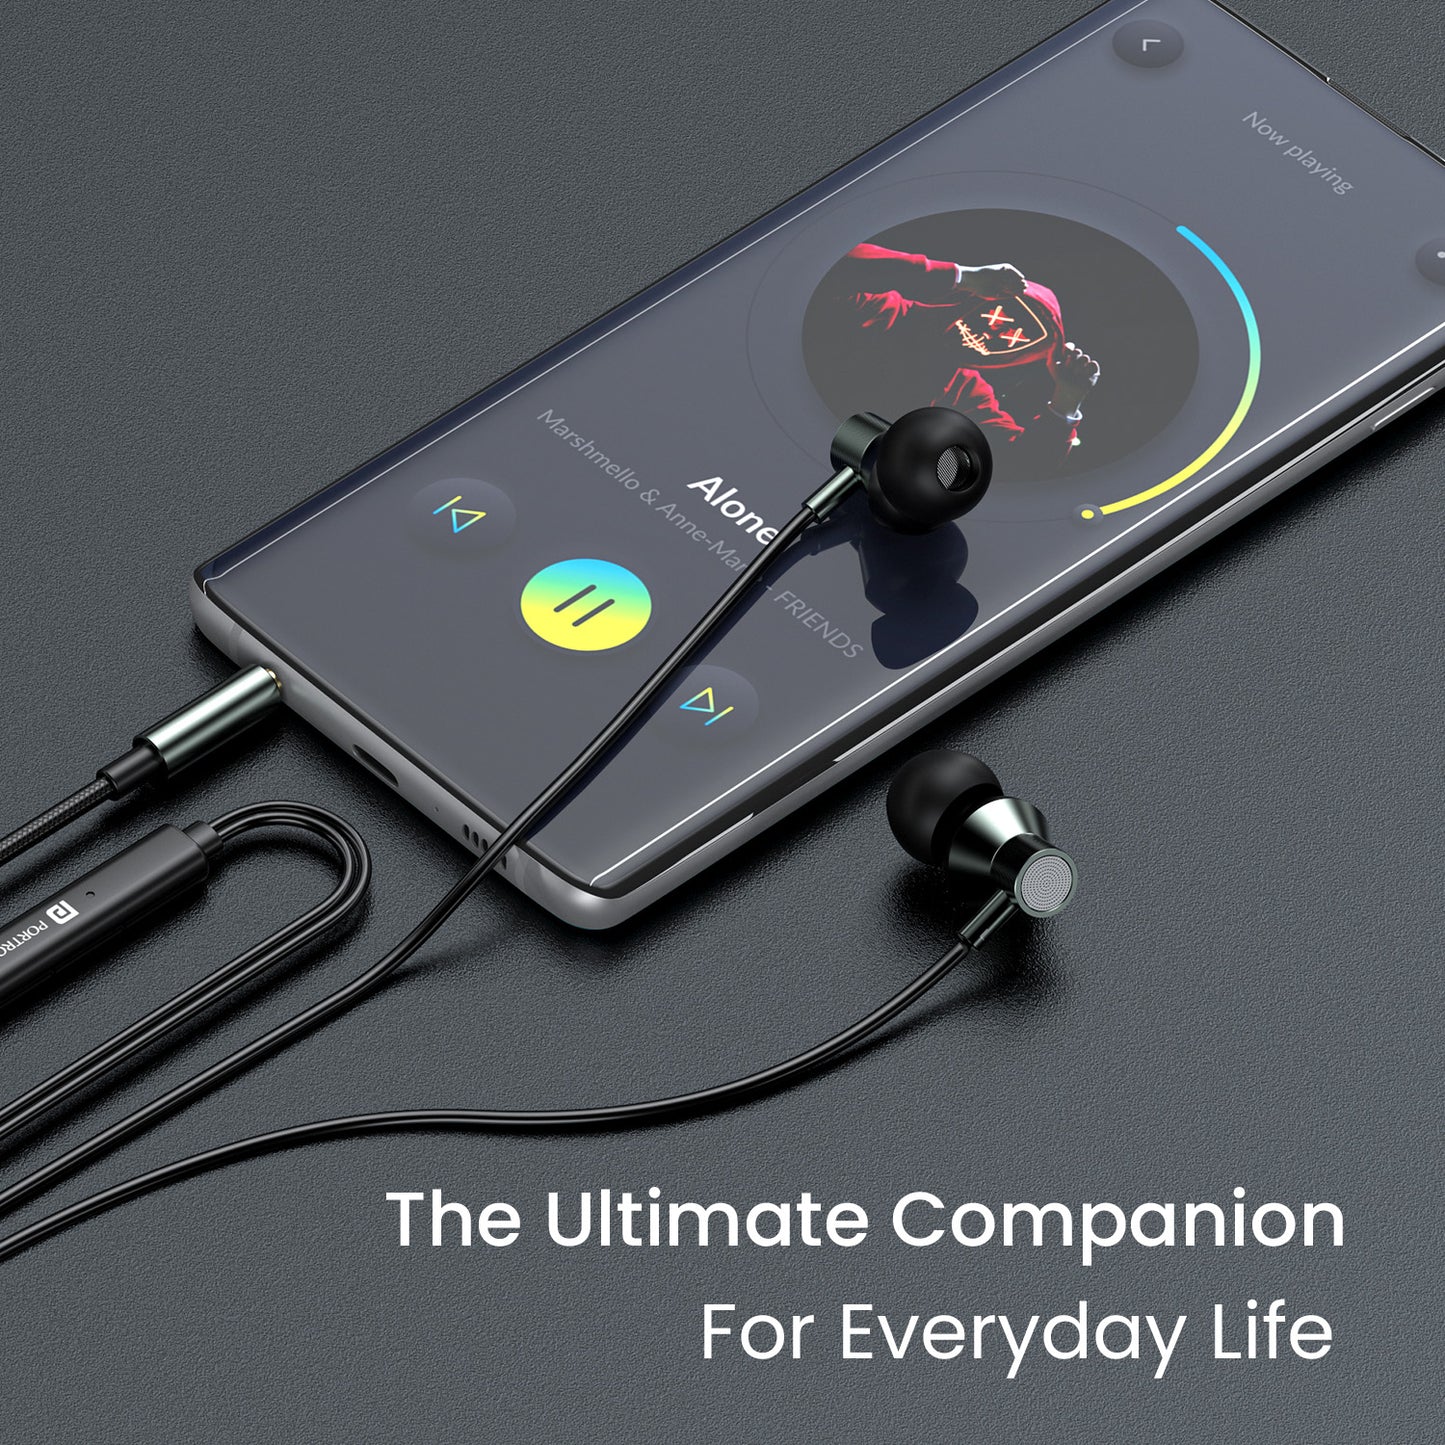 Black Portronics wired earphones |wired headsets| headphones with wire for everyday use